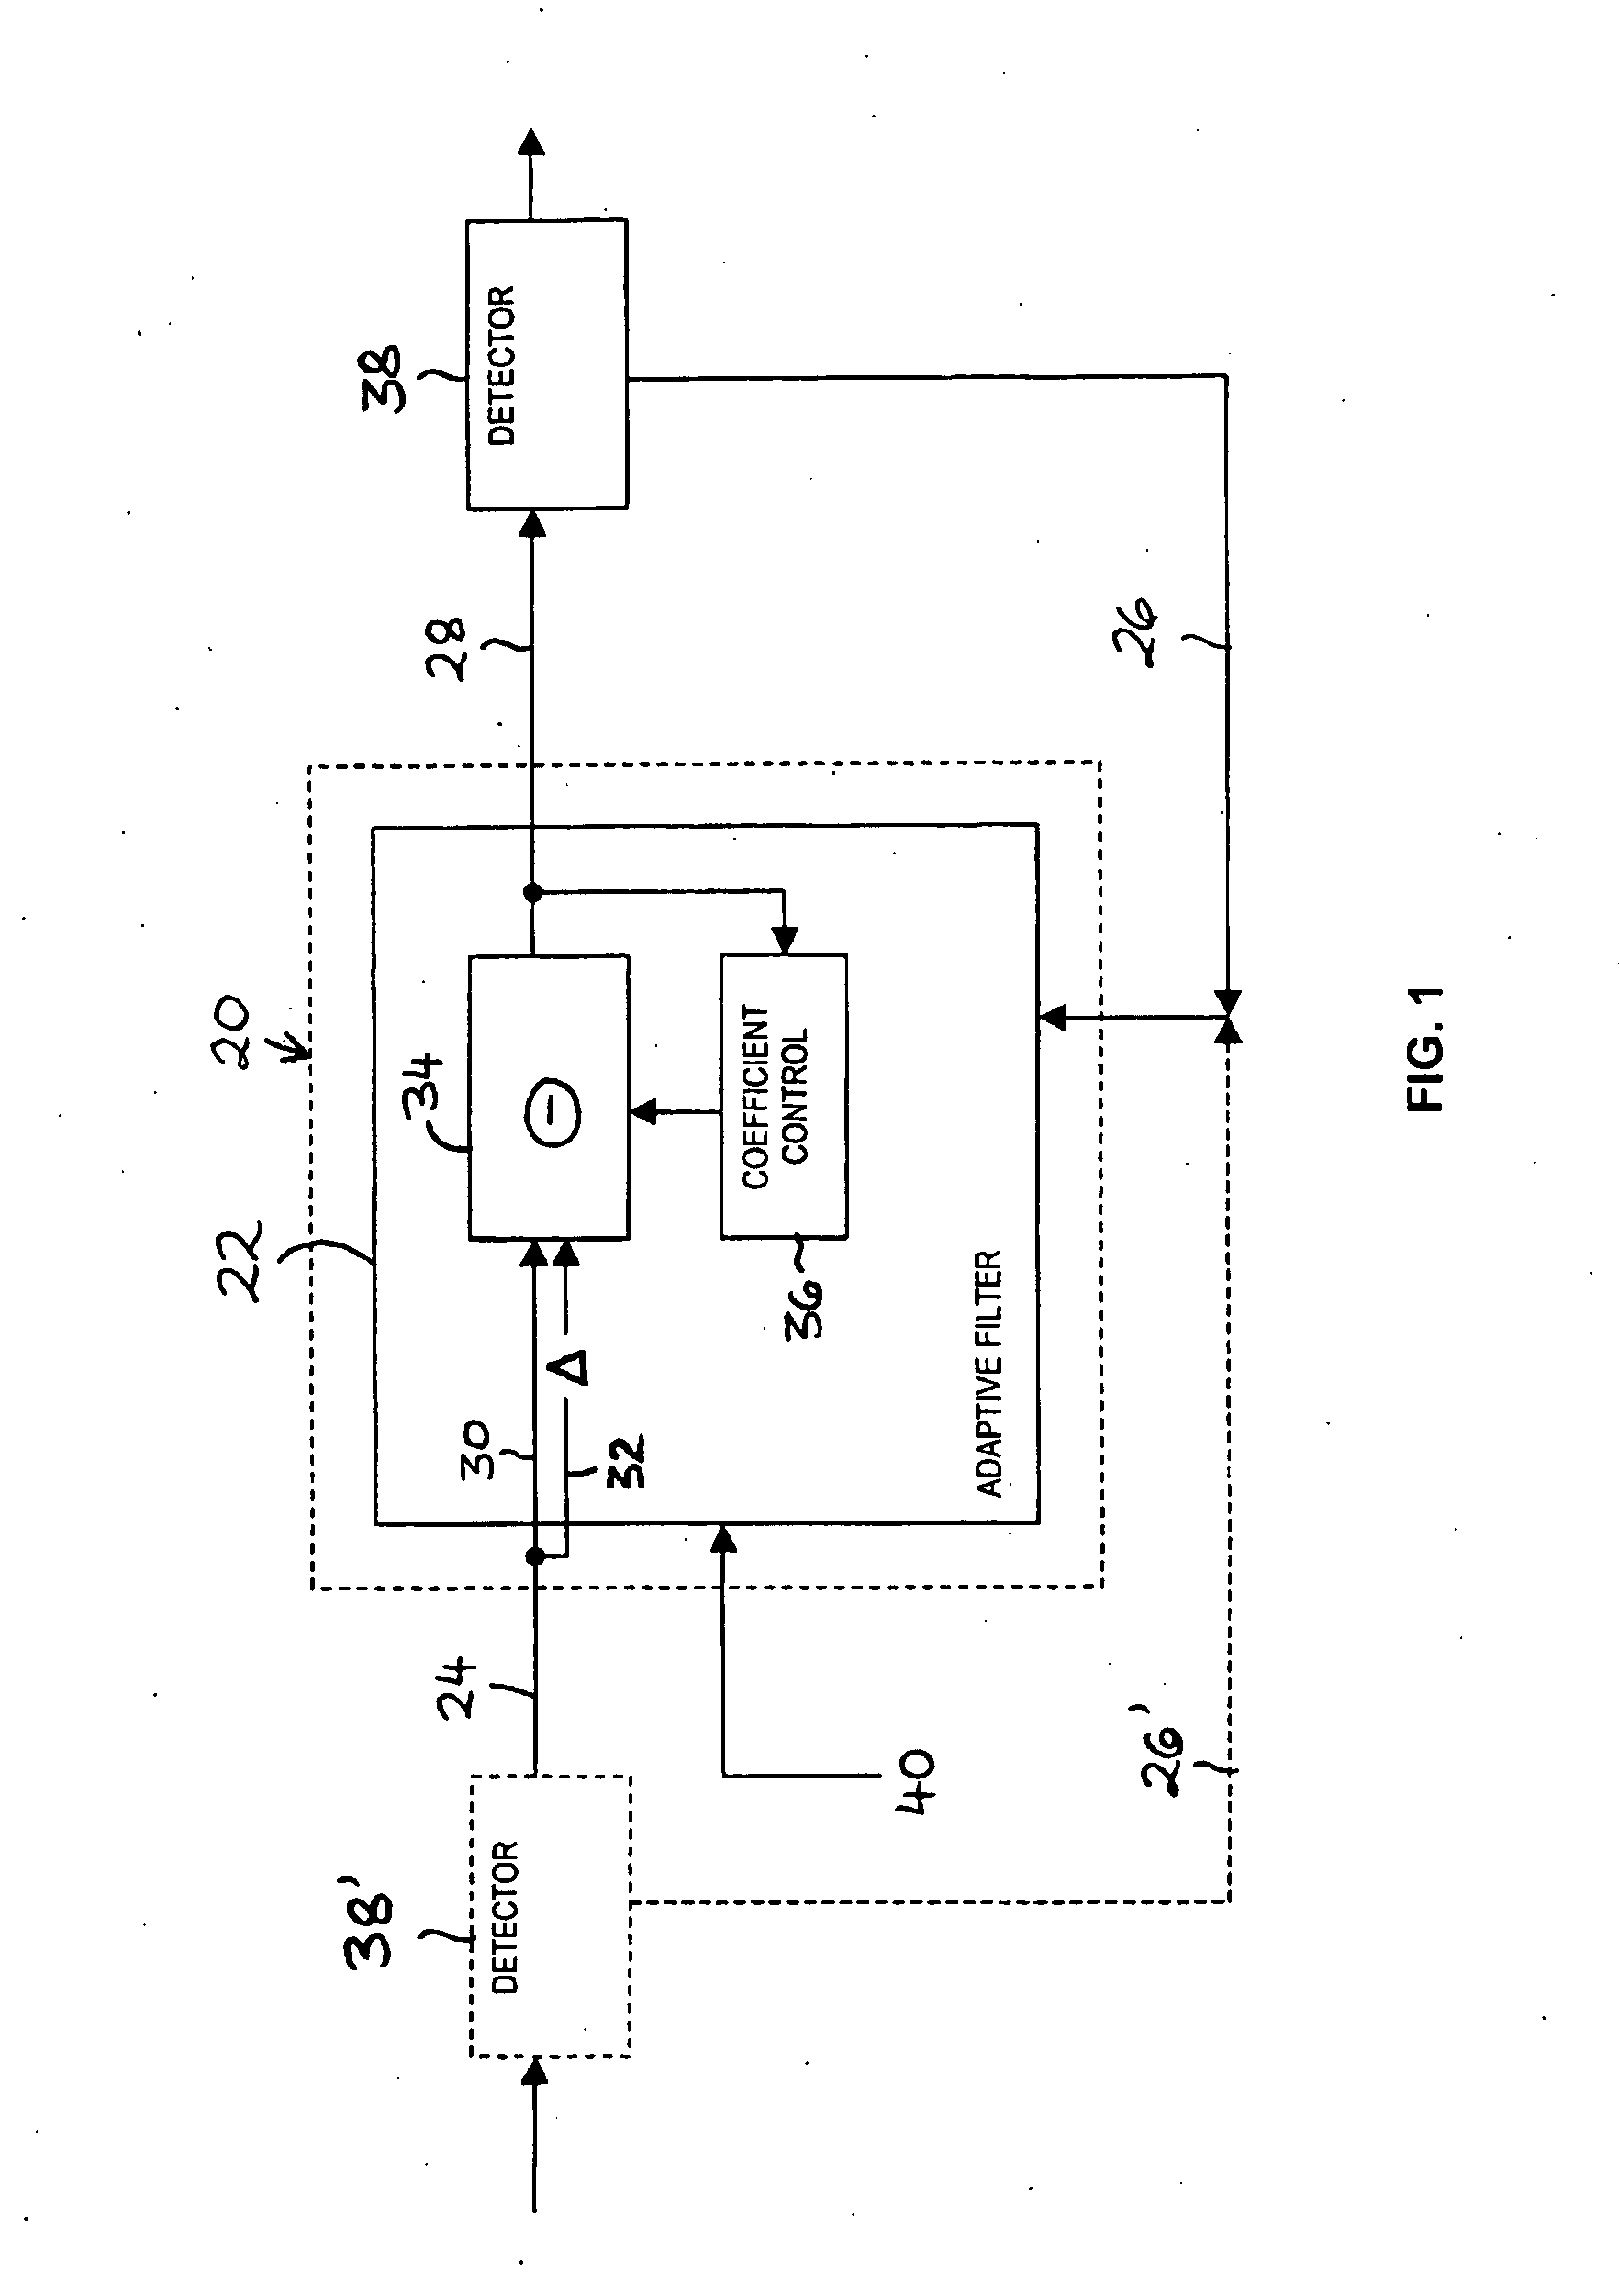 Supressing interference for wireless reception and improvements relating to processing a frequency shift keyed signal